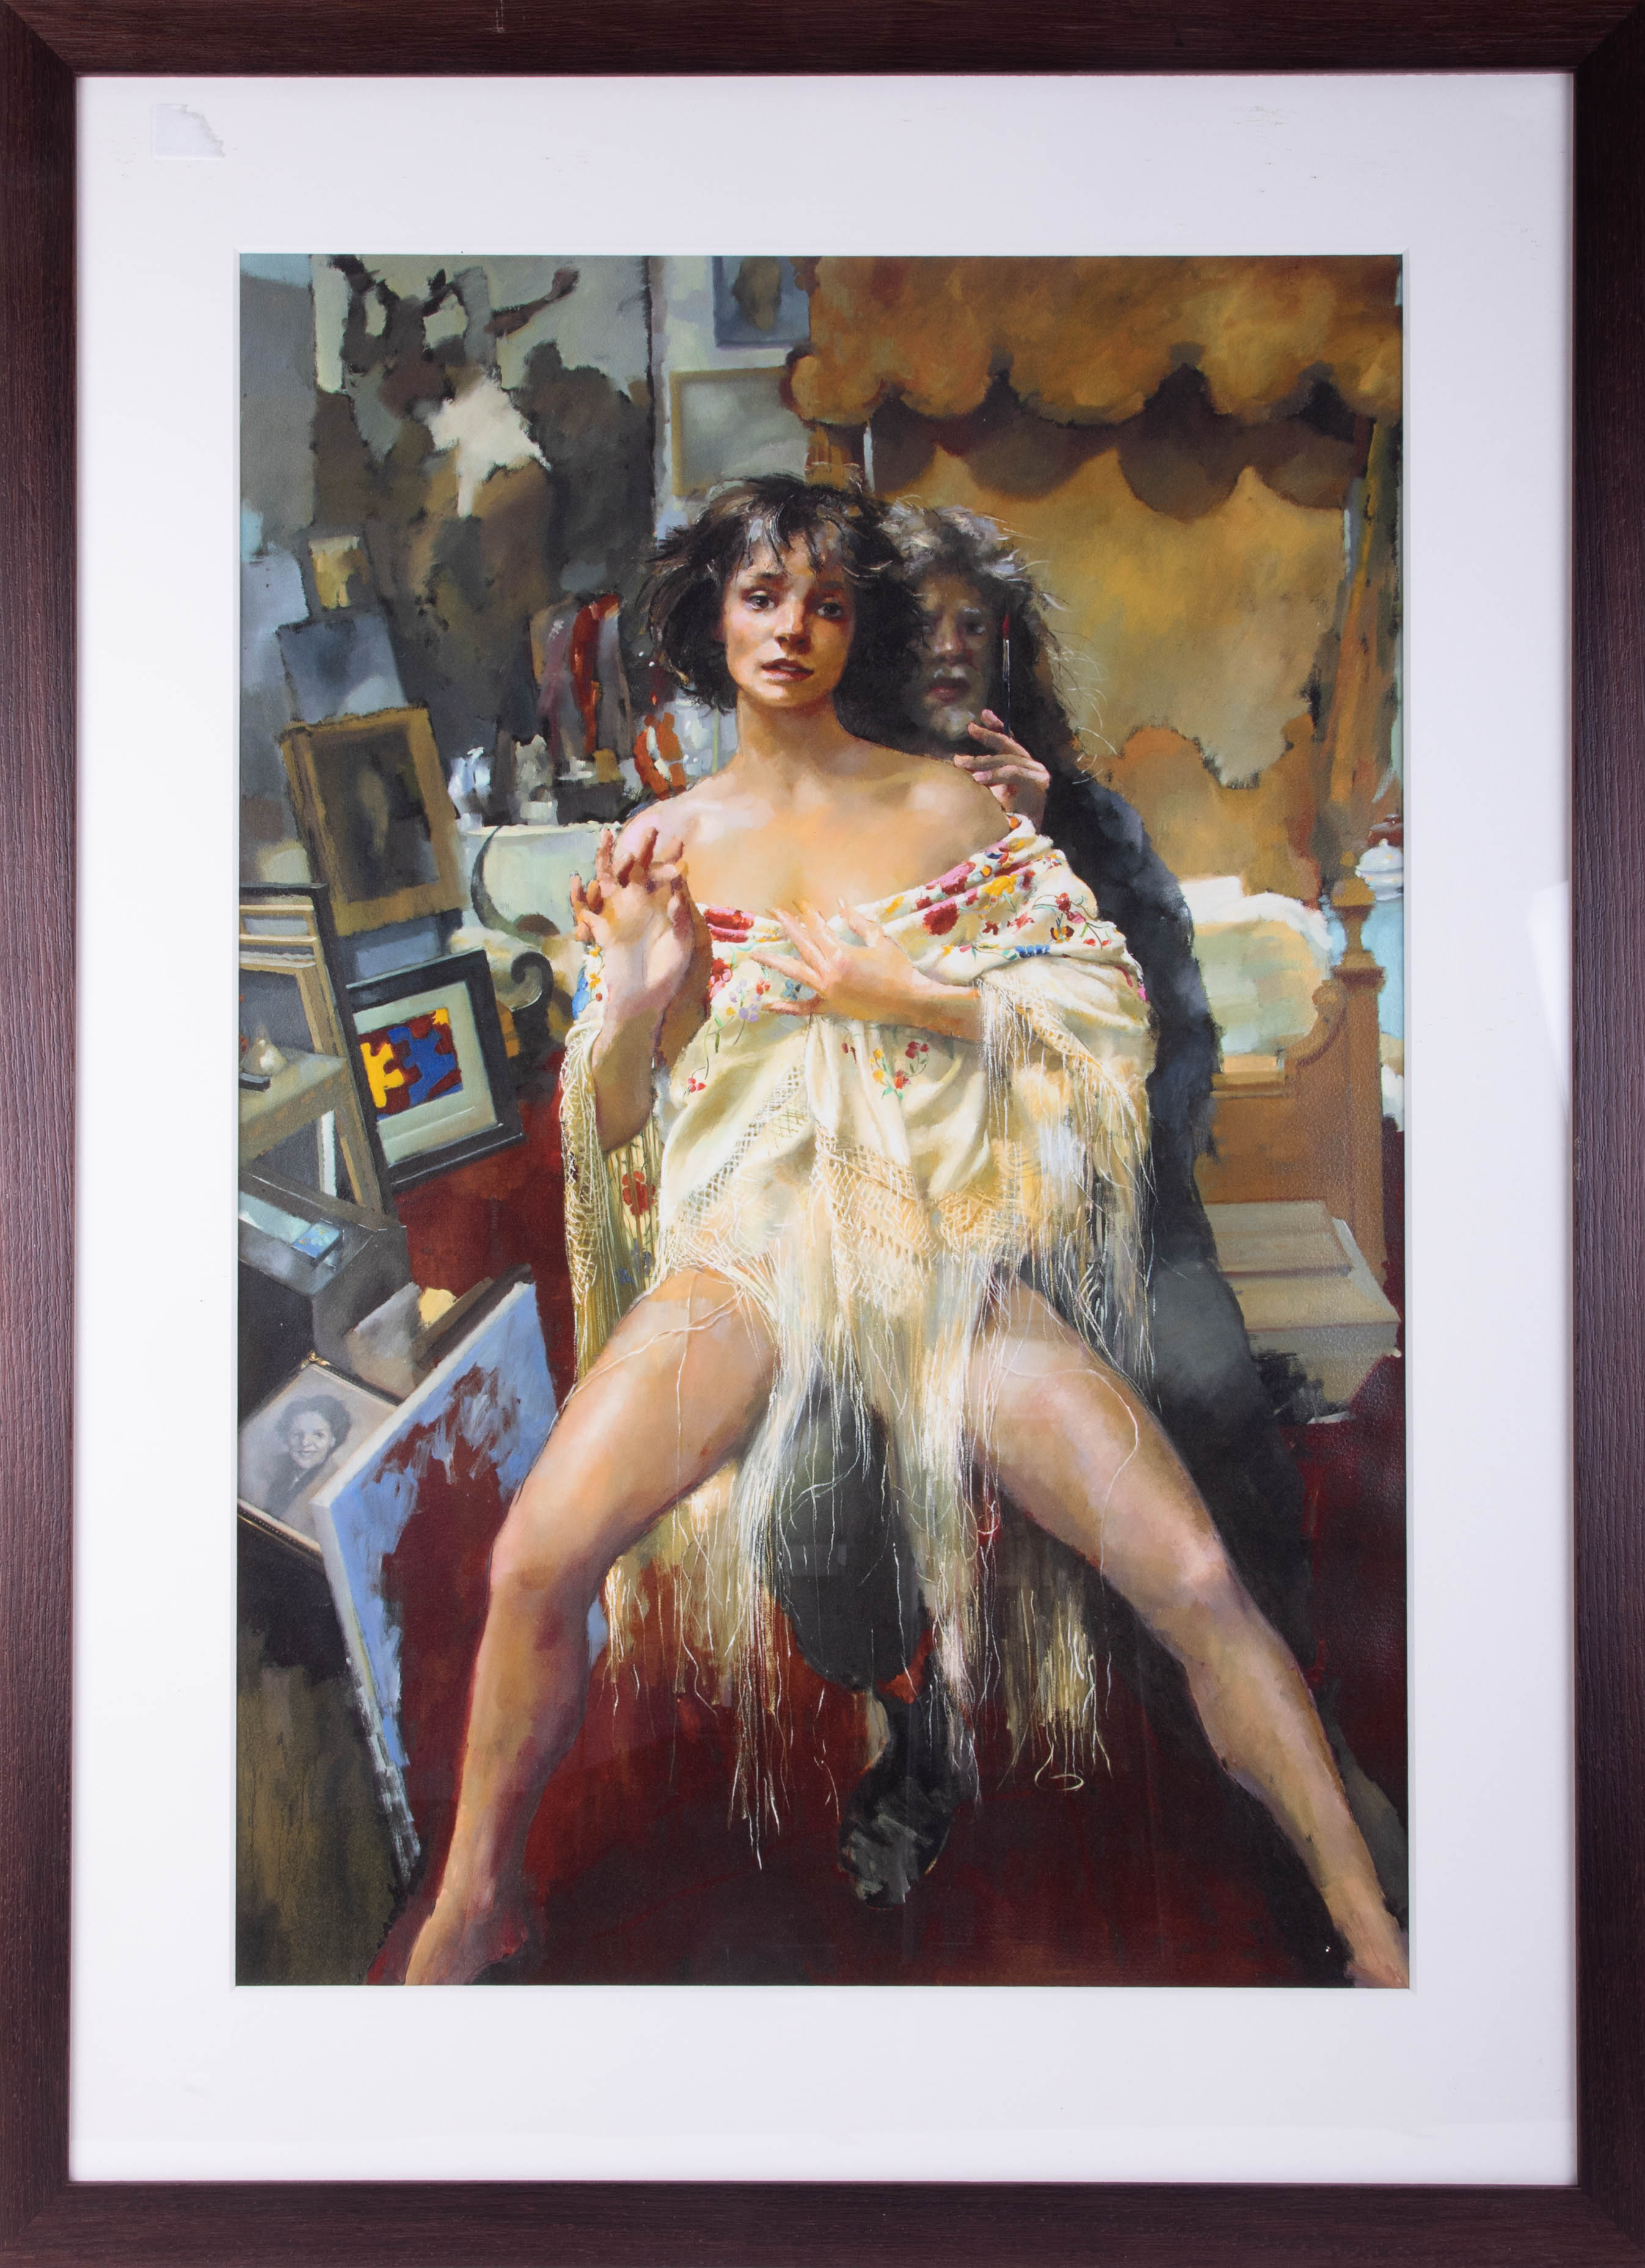 Robert Lenkiewicz, 'Benedicta with the Painter' open print, 73cm x 50cm, framed and glazed.